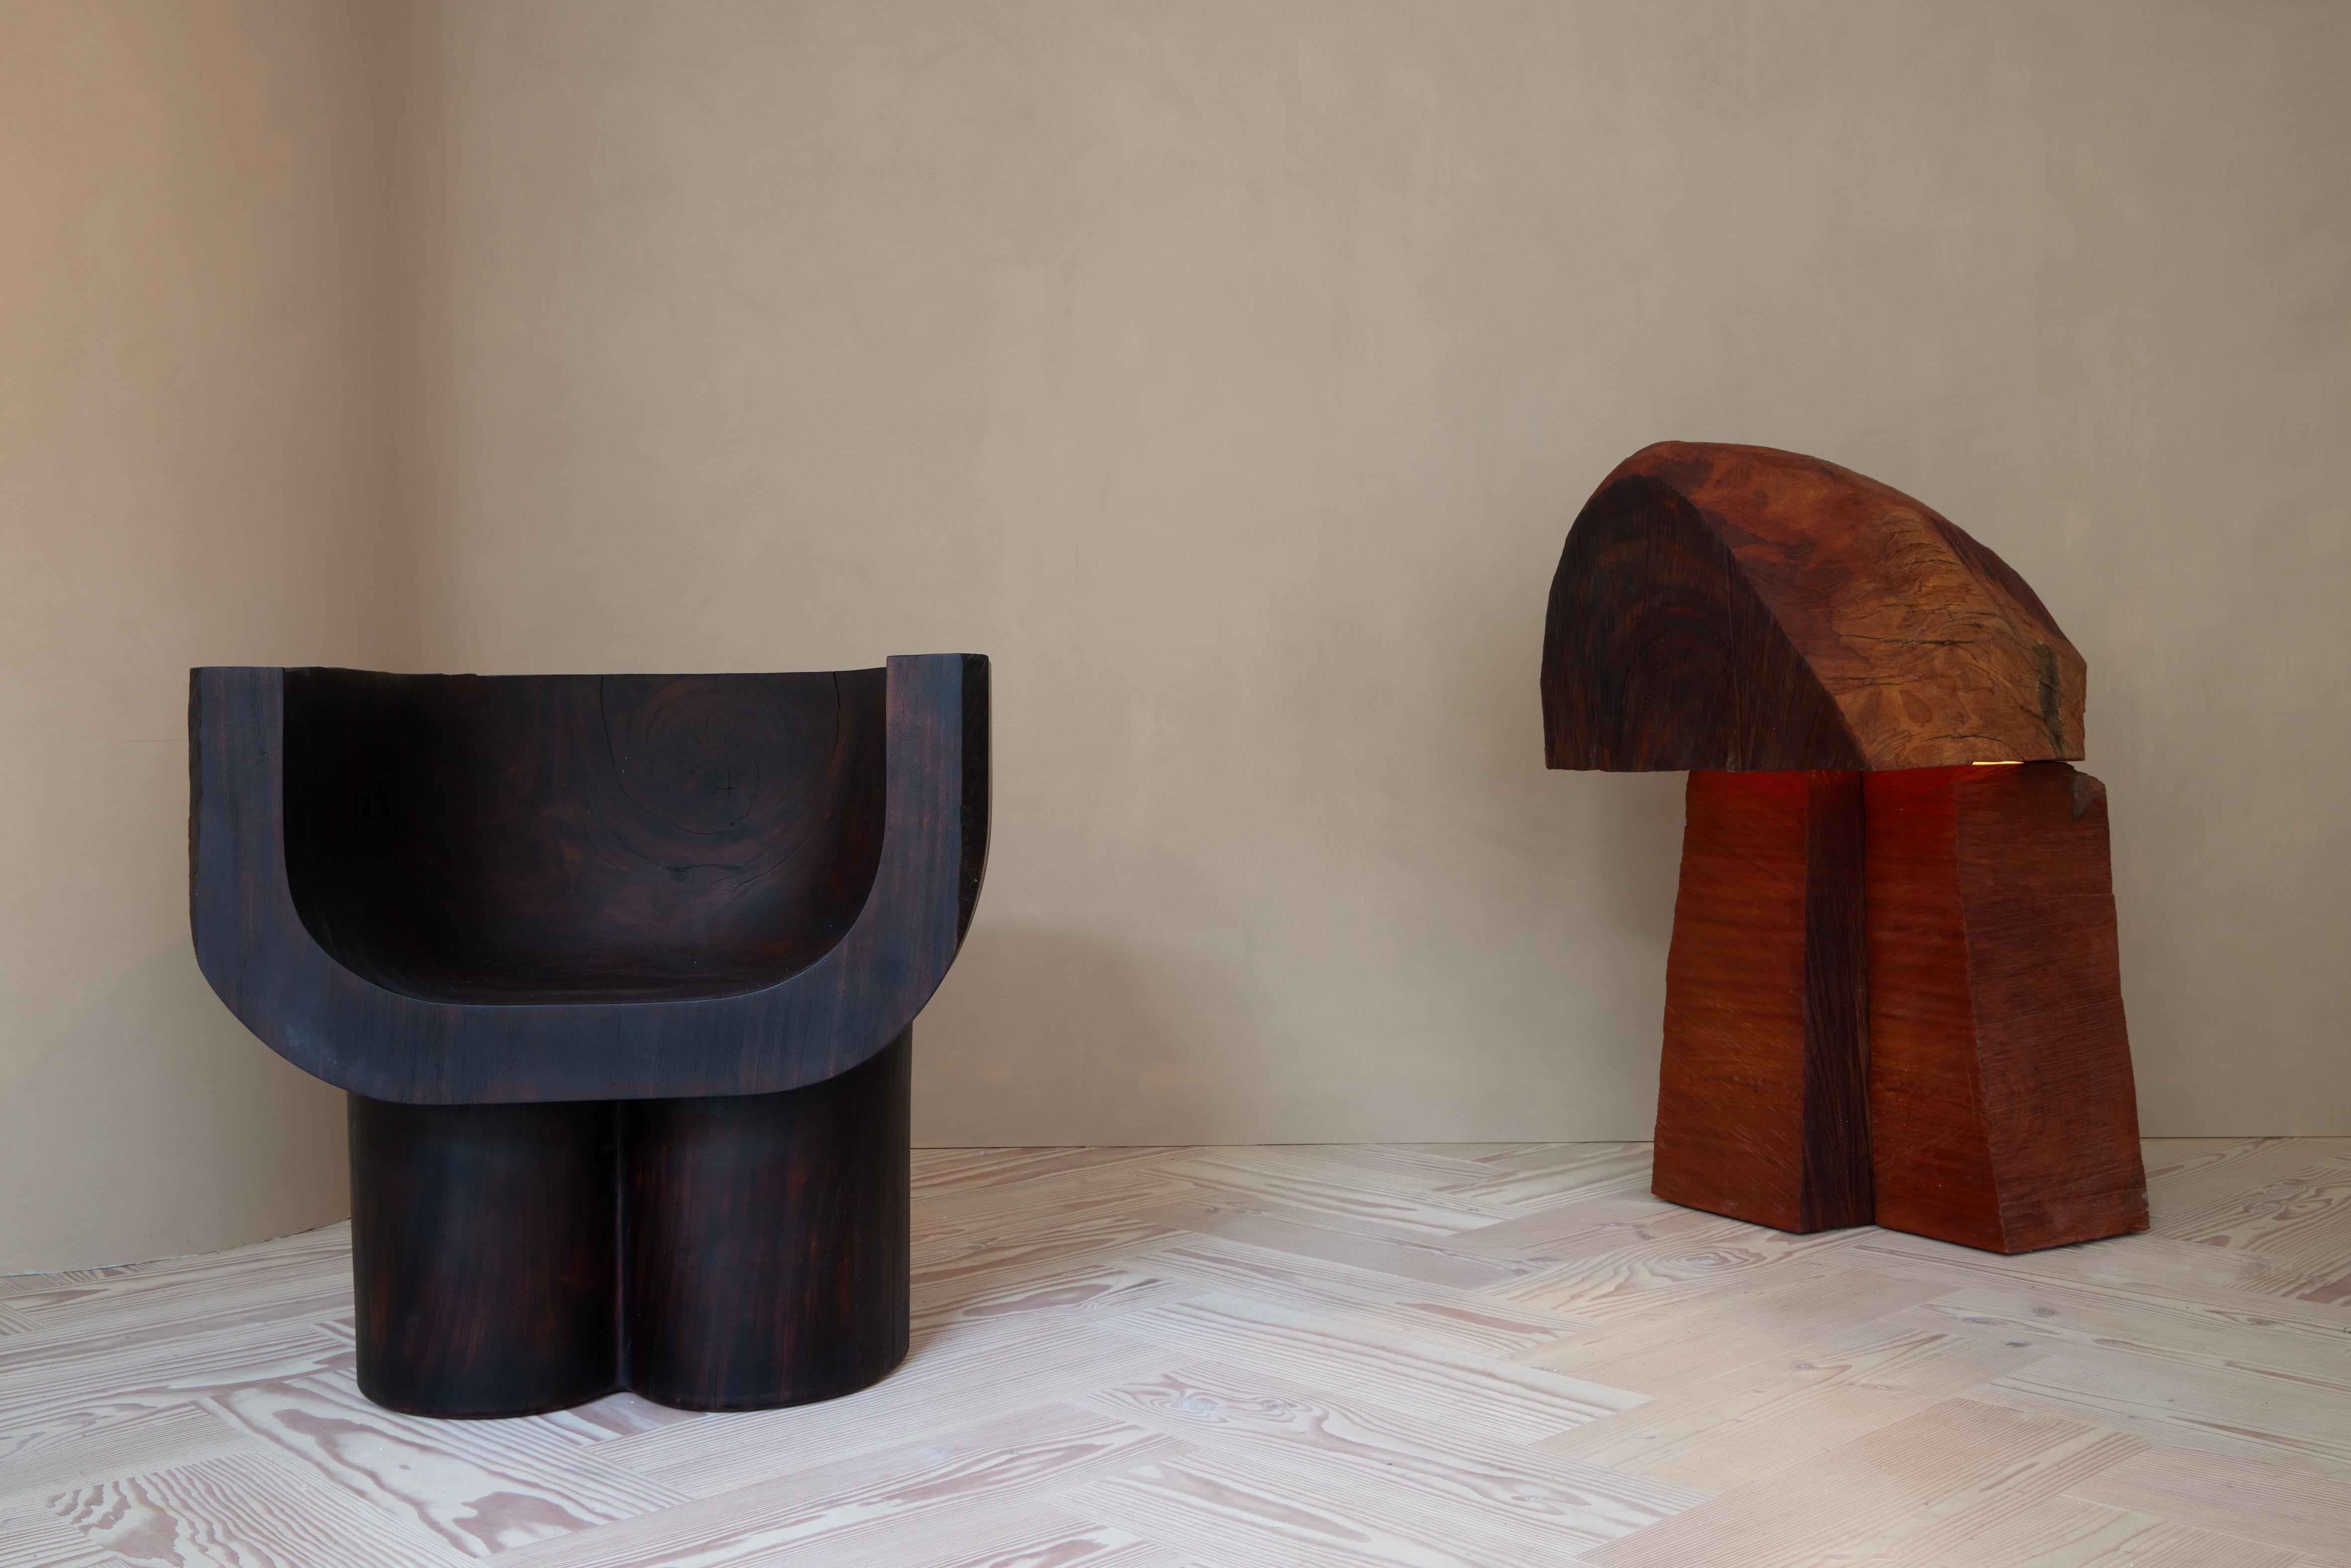 Rodriguez's Maxed lamp hand-carved from Mahogany, salvaged on the island of Puerto Rico after the devastating hurricane of 2017. Allowing the raw wood to speak for itself, the piece also includes a separate plaster reflector which nestles in the